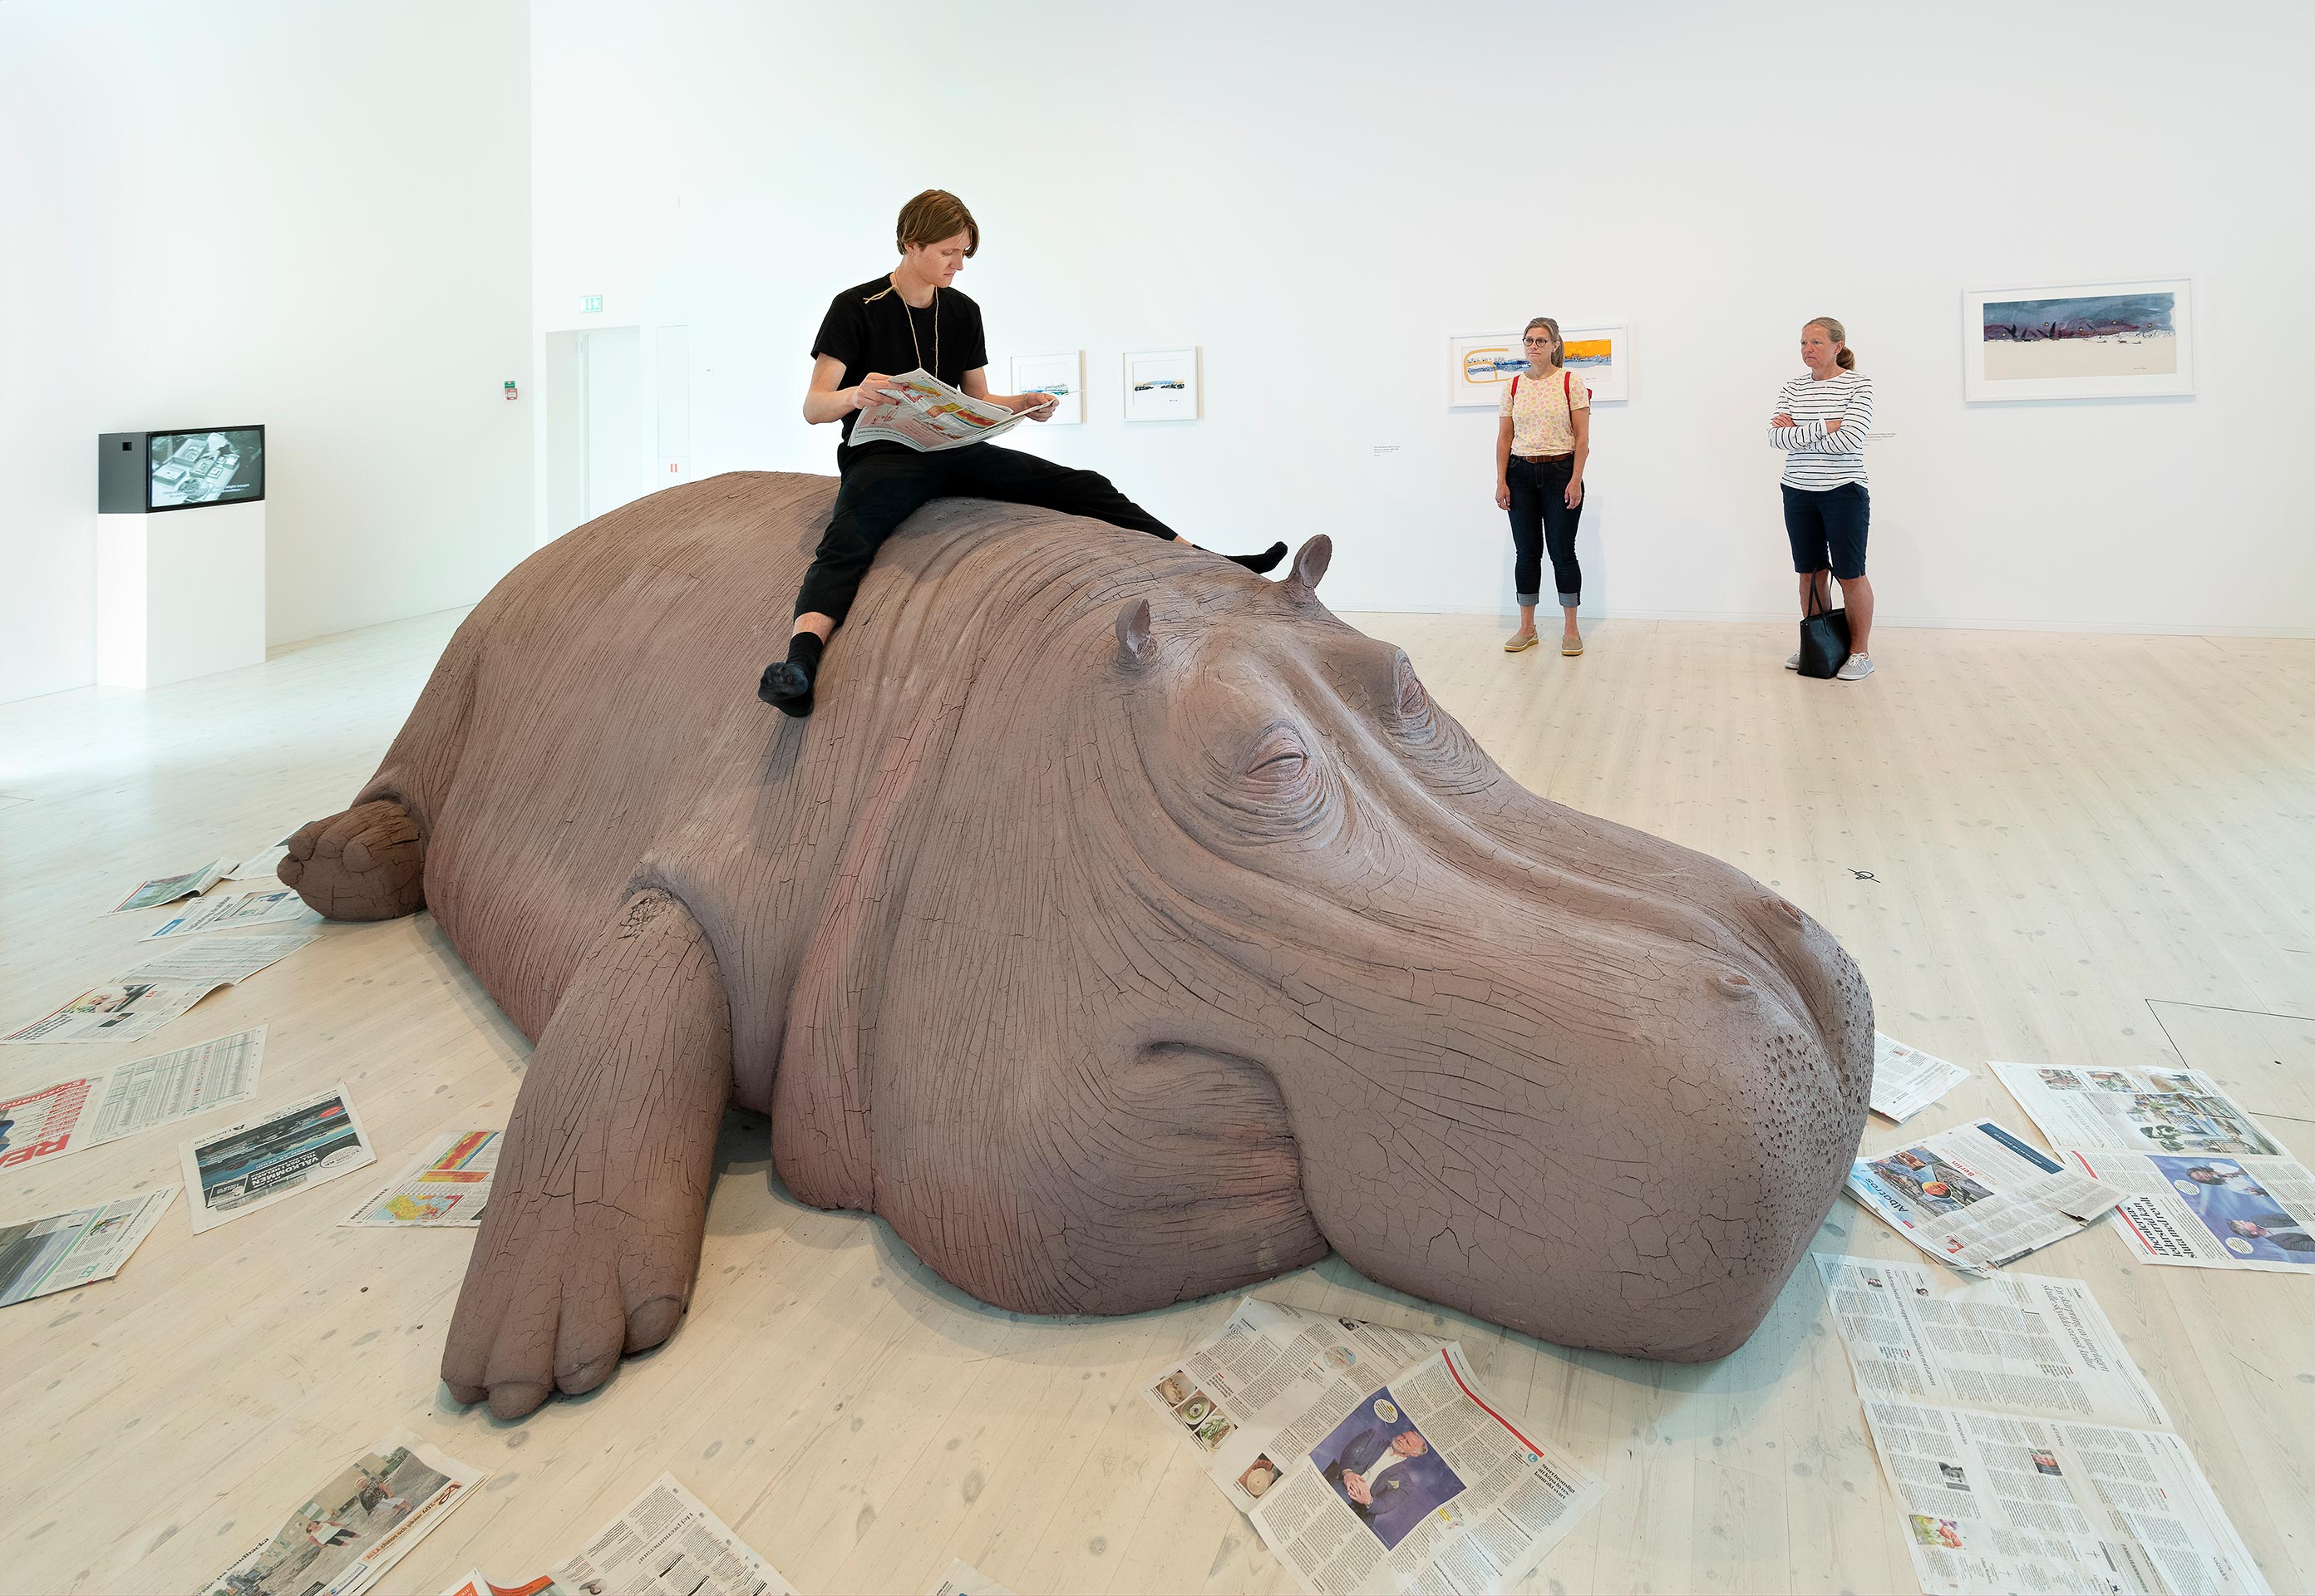 Allora & Calzadilla, Hope Hippo, 2005. Installation shot, Å®mea. Installation views from Animalesque Art Across Species and Beings at Bildmuseet (2019). Photo by Mikael Lundgren